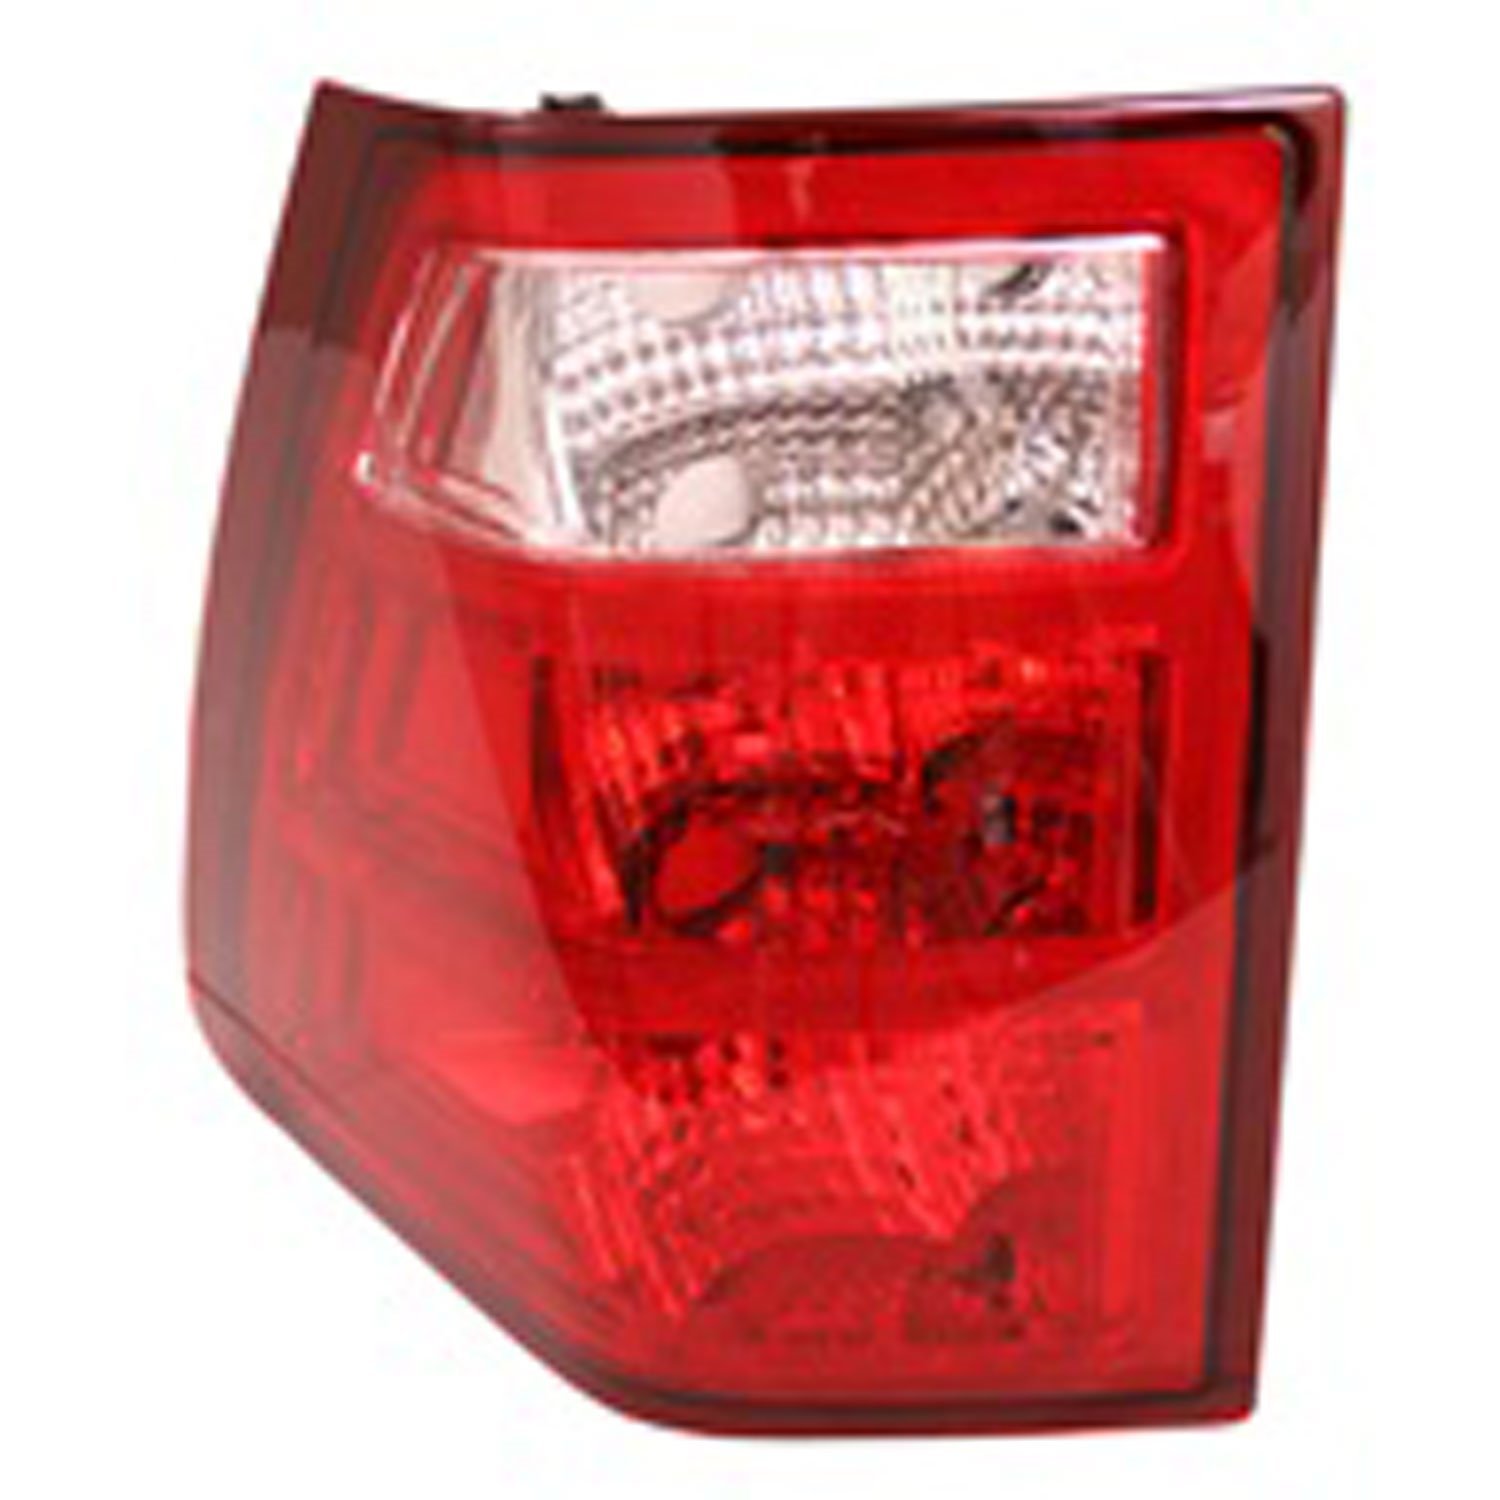 Replacement tail light assembly from Omix-ADA, Fits right side of 05-06 Jeep Grand Cherokee WK